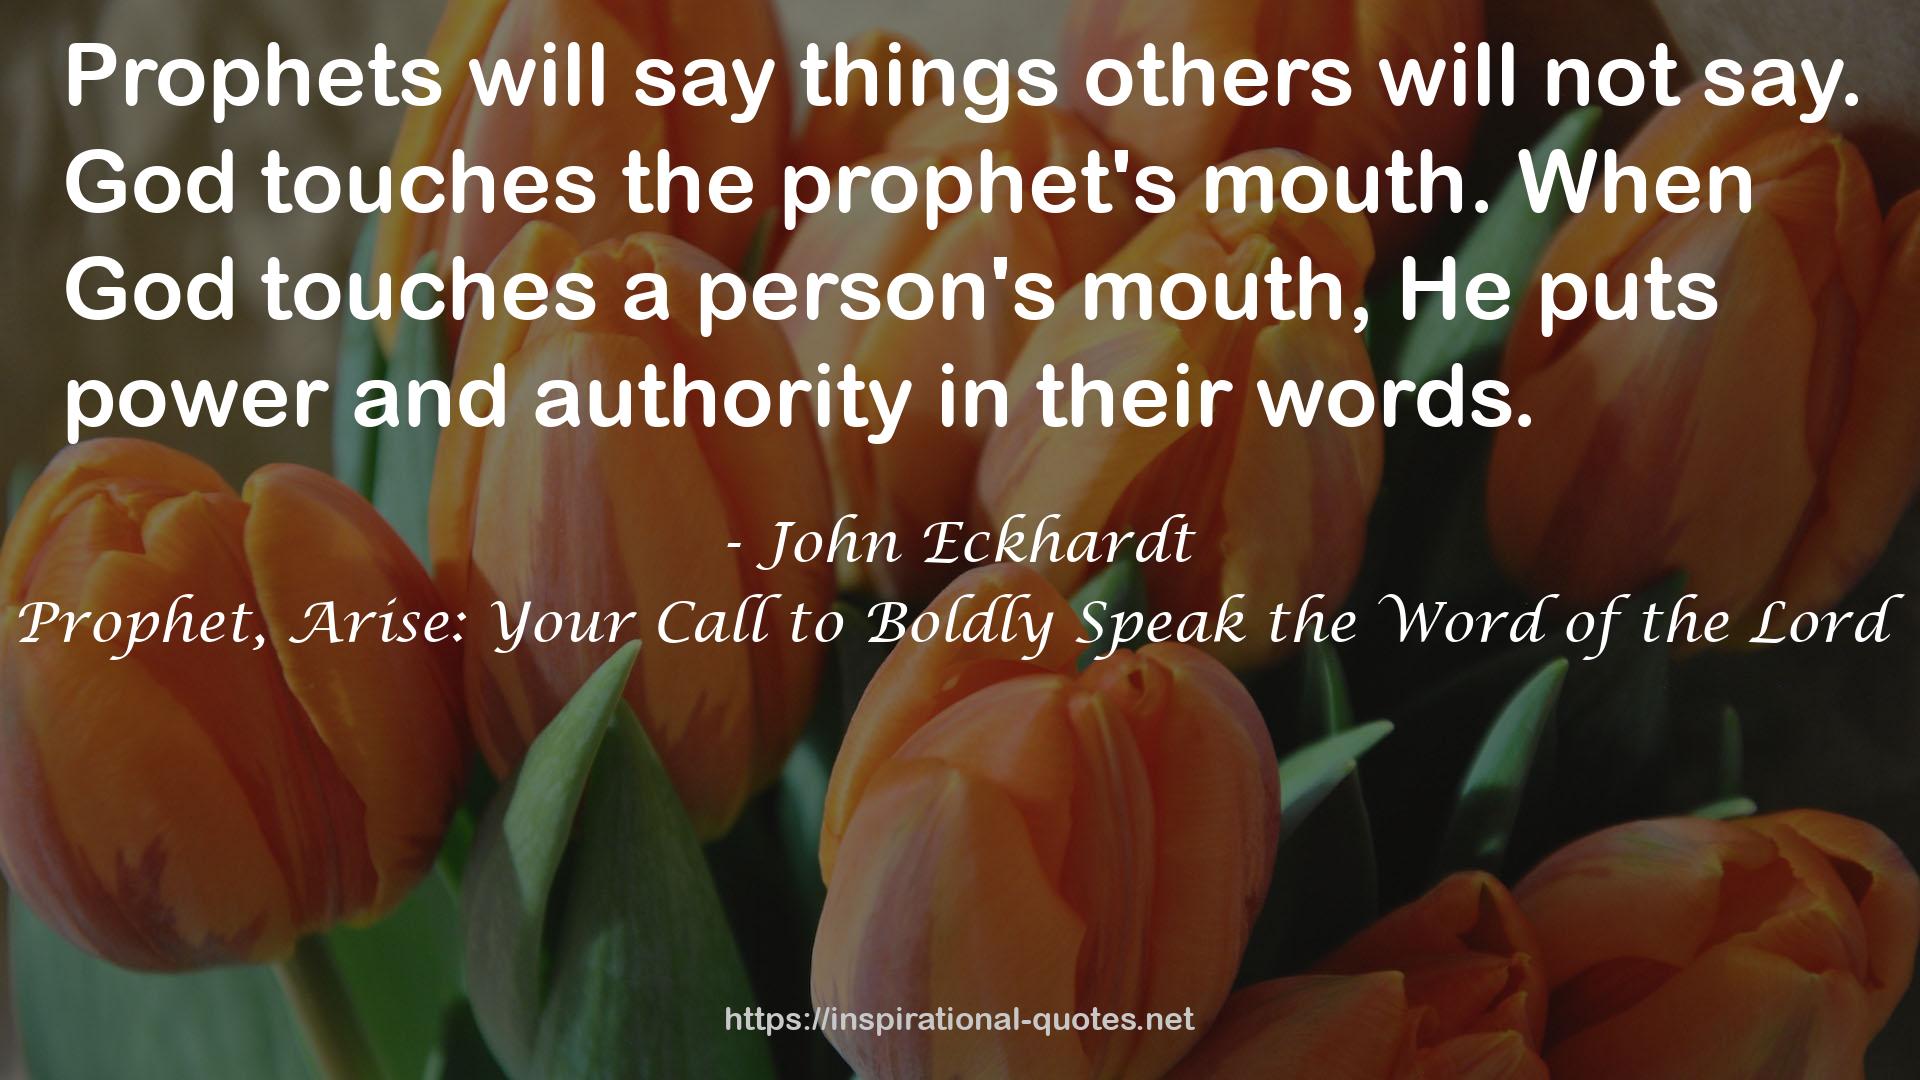 Prophet, Arise: Your Call to Boldly Speak the Word of the Lord QUOTES